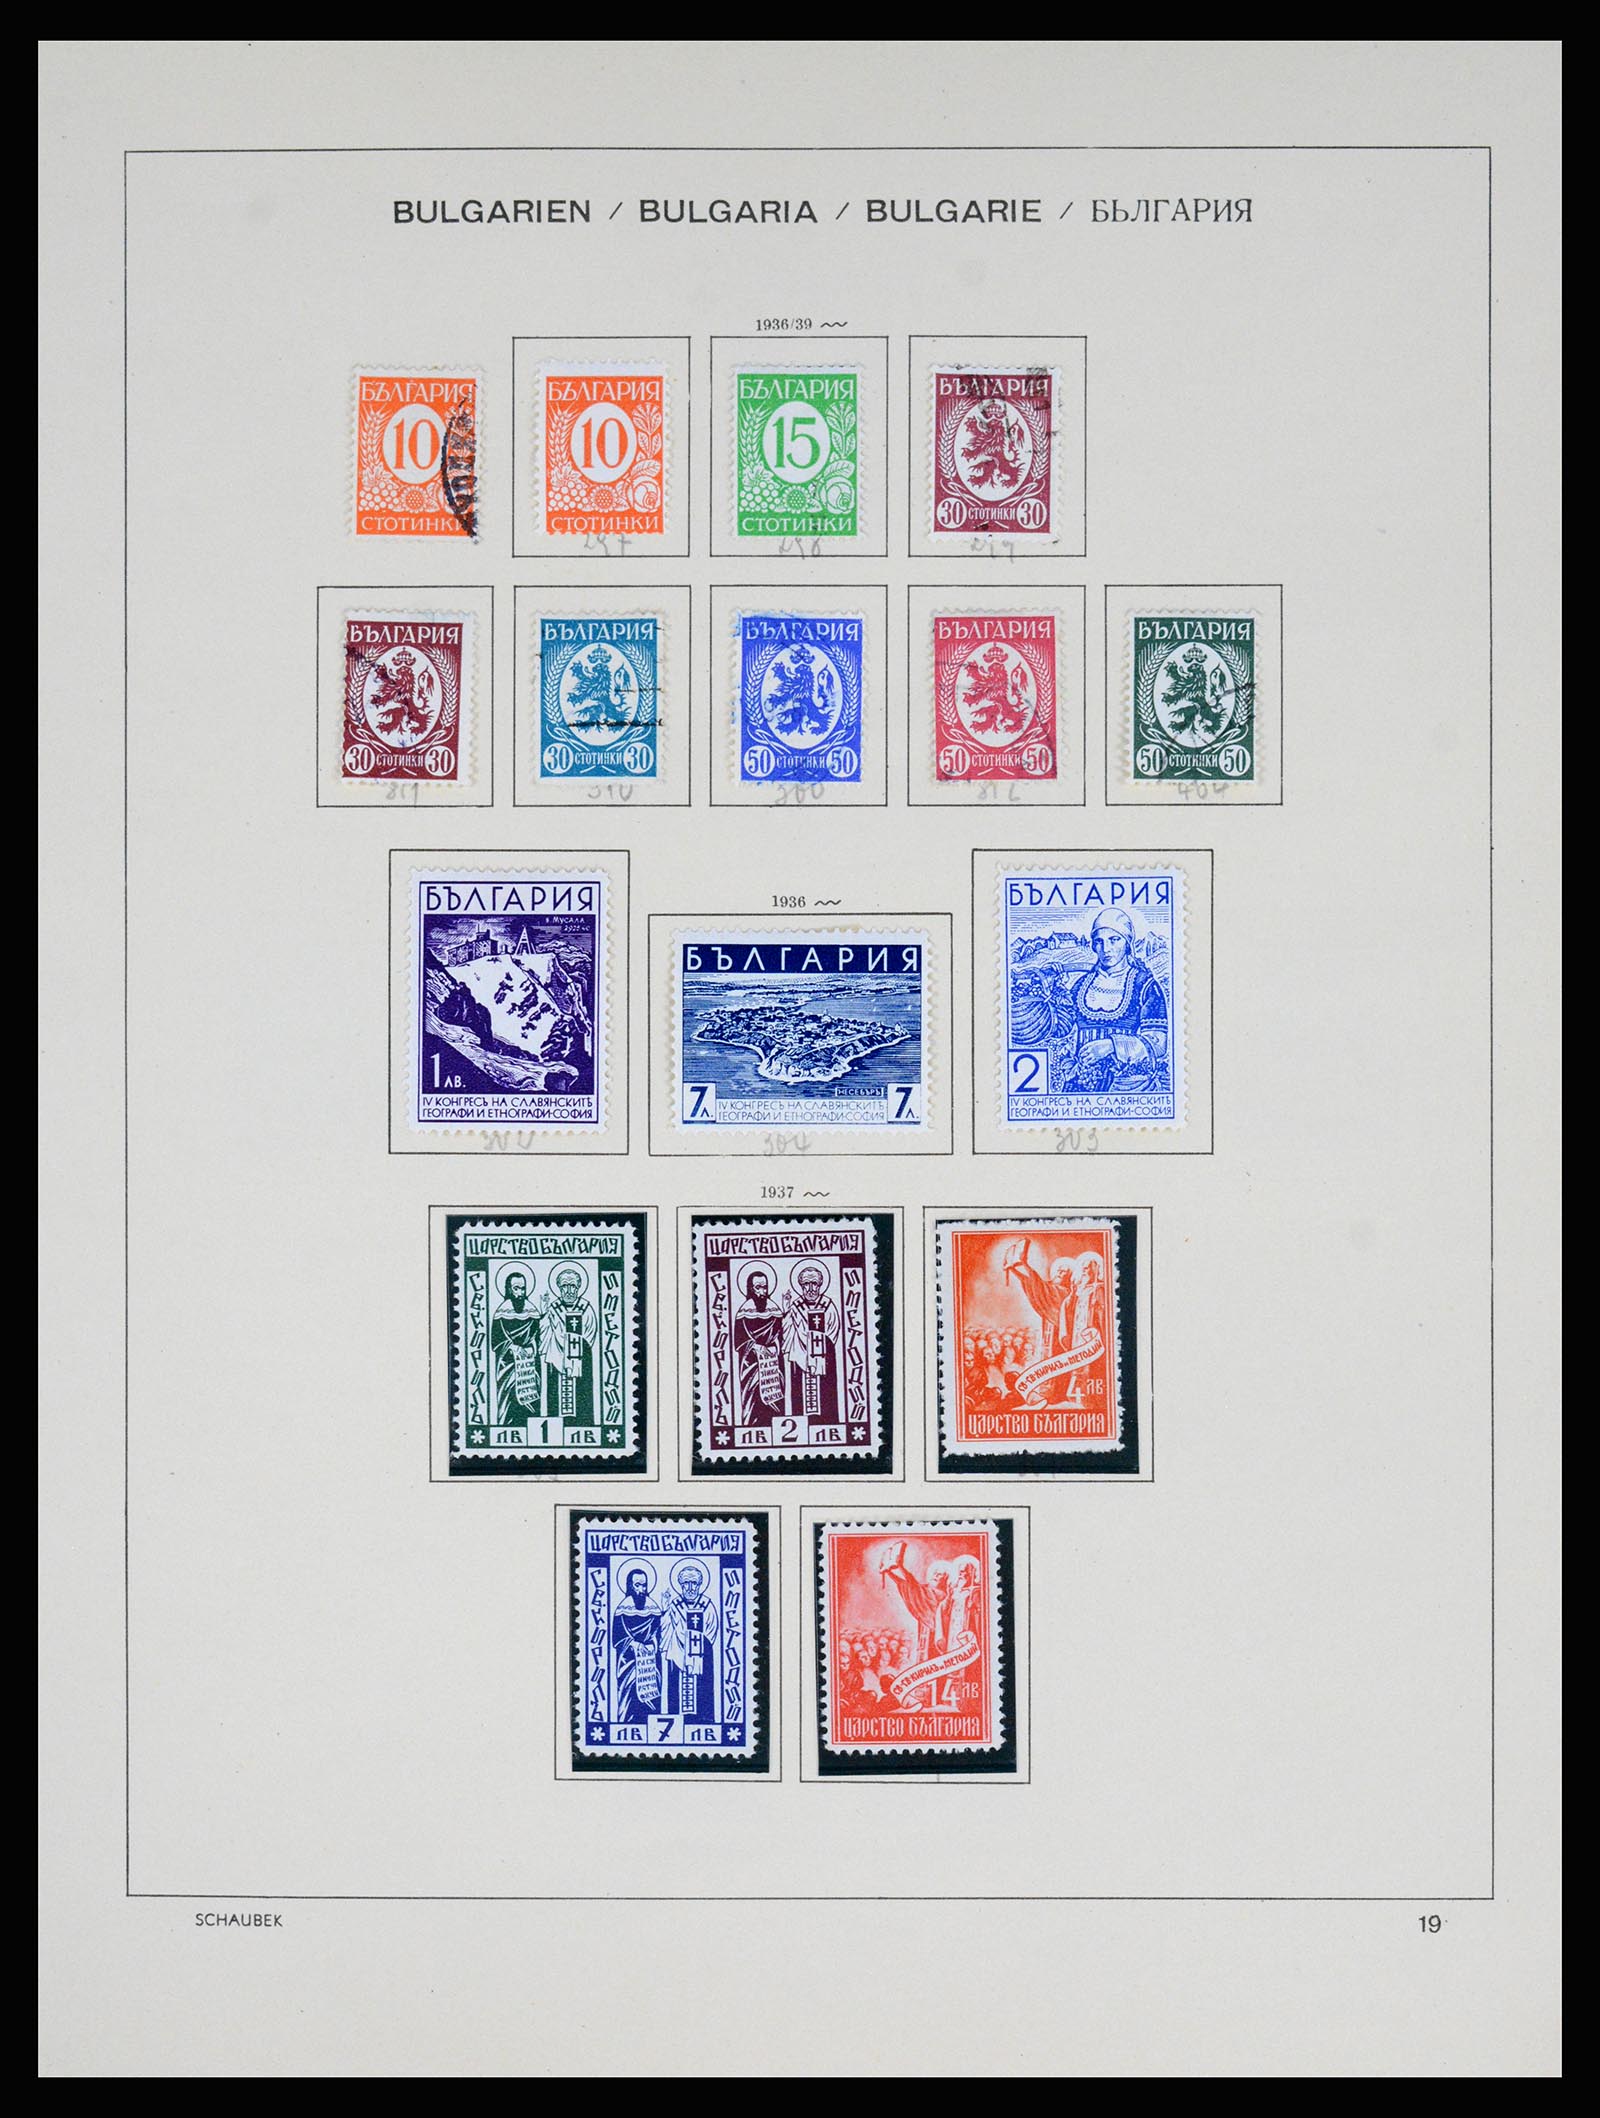 37113 021 - Stamp collection 37113 Bulgaria 1879-1970.